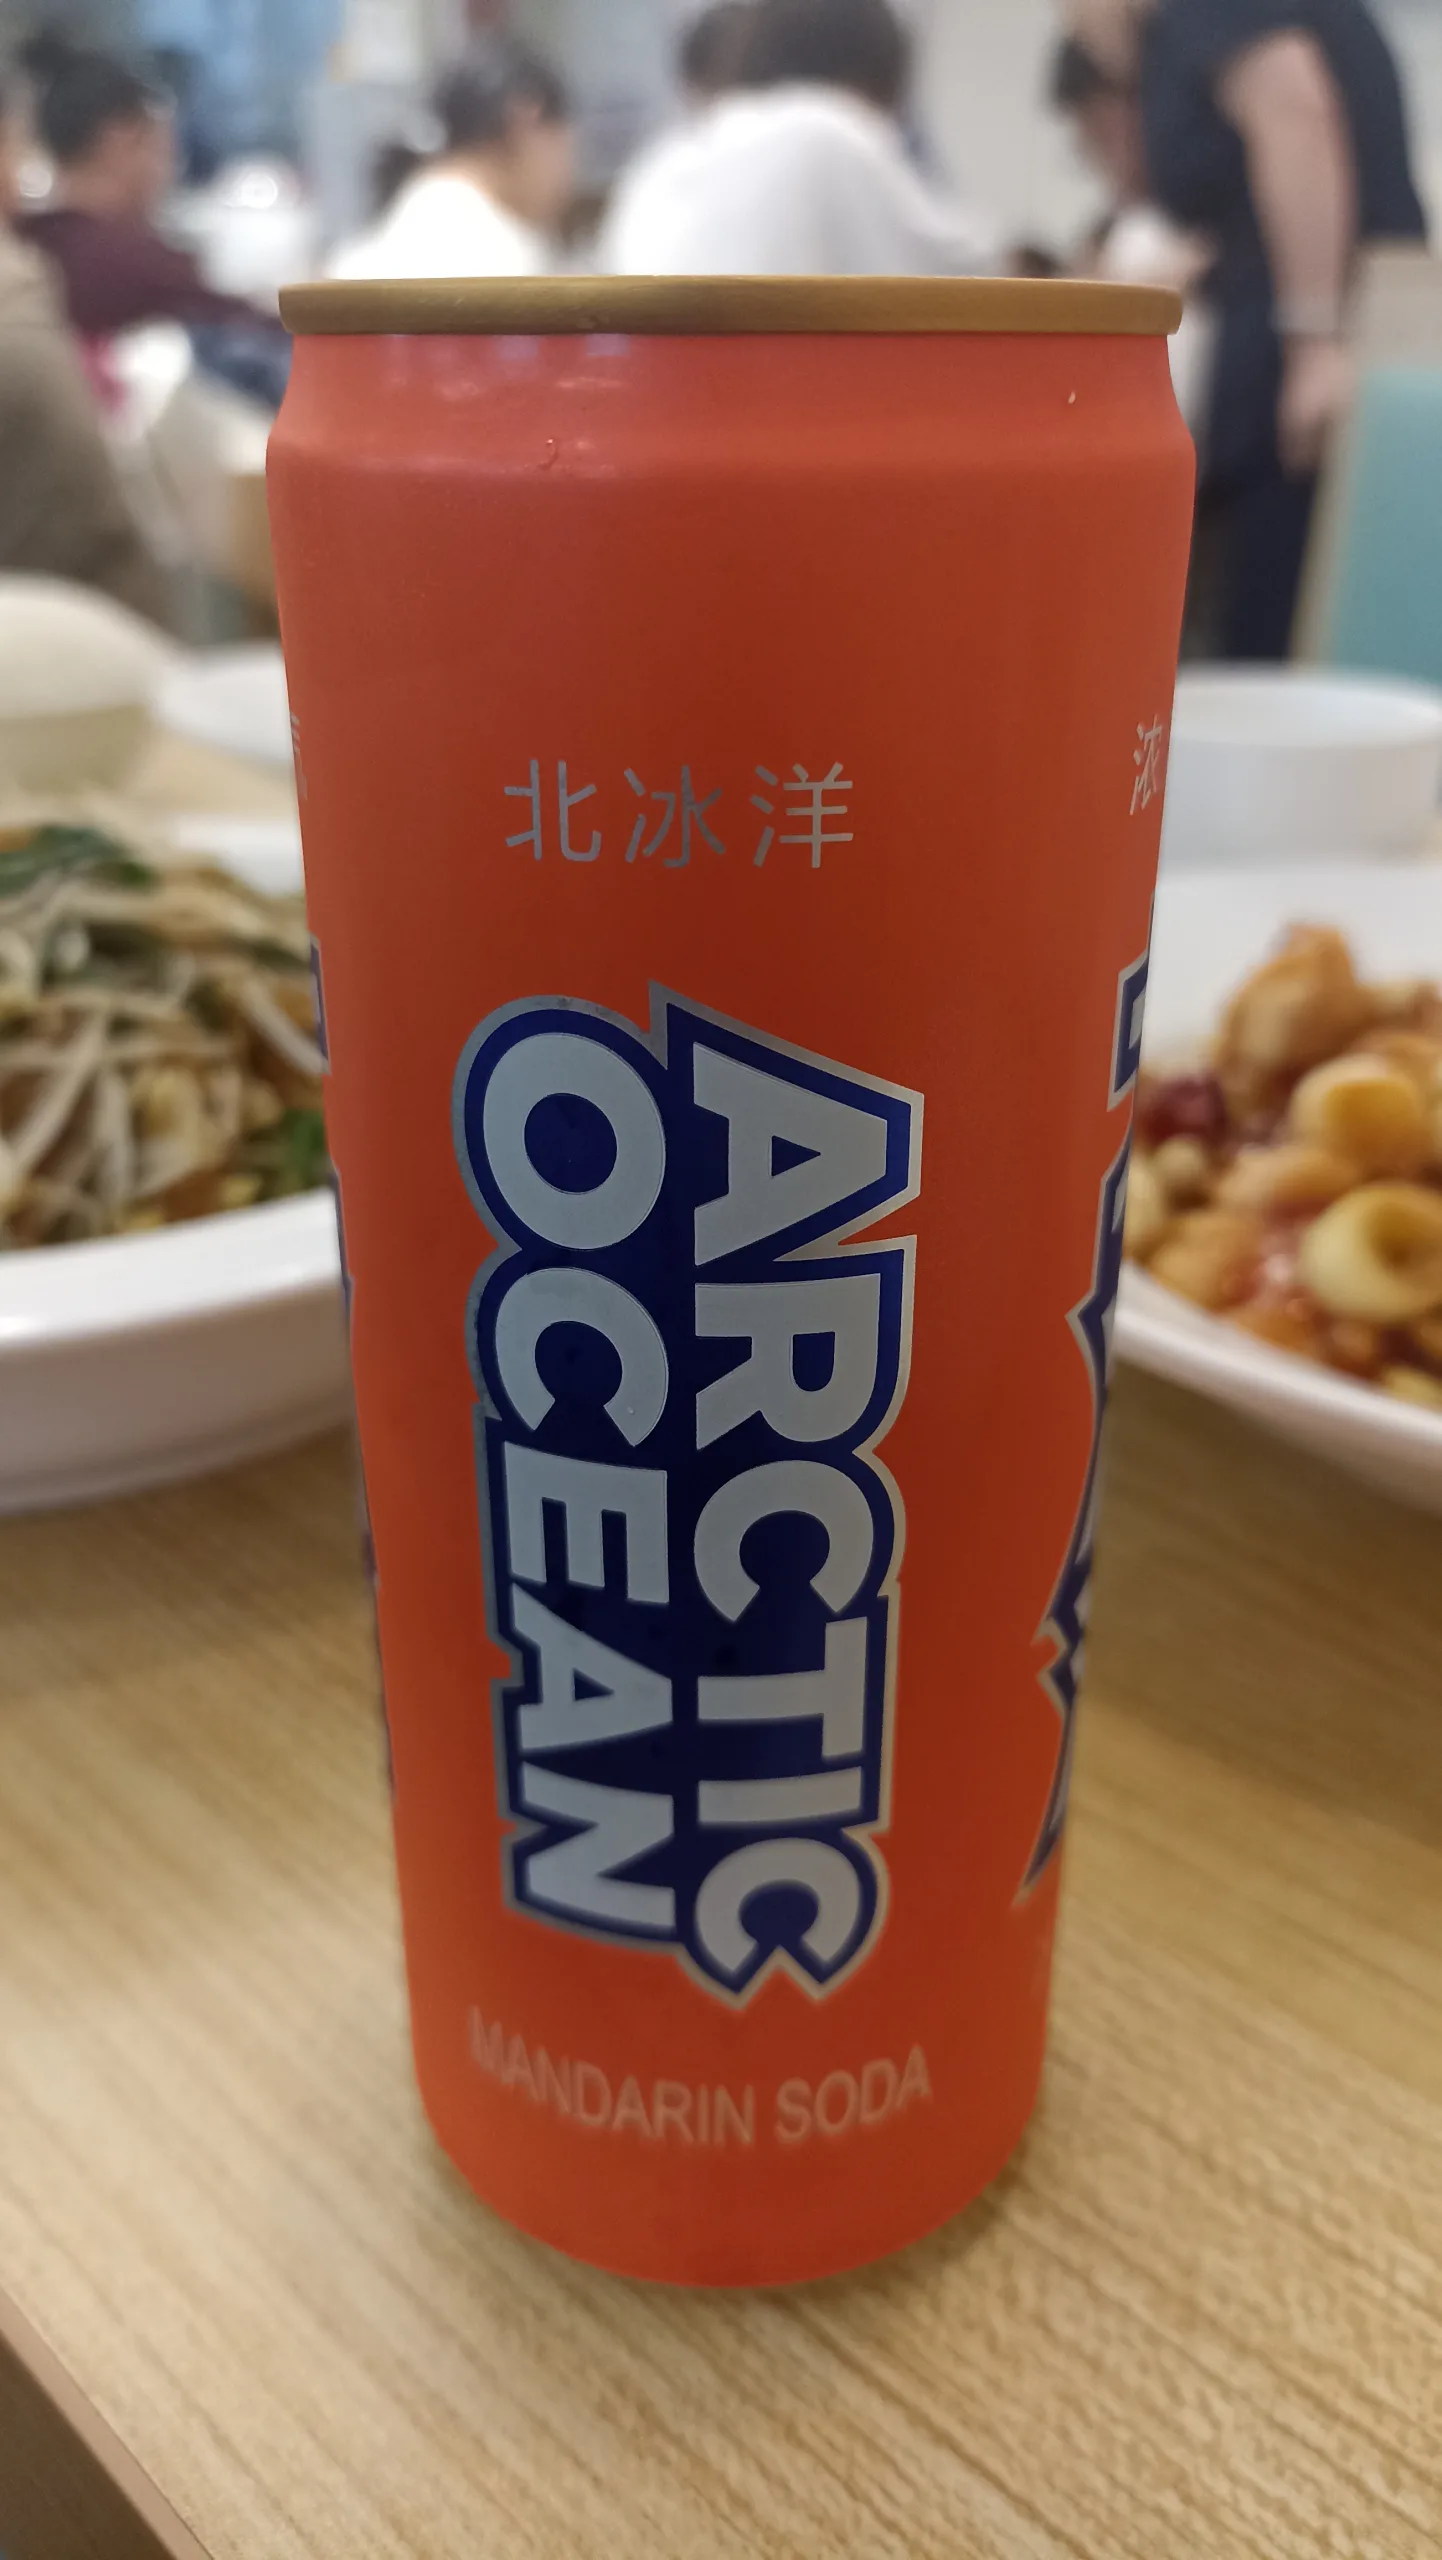 A can of Arctic Ocean, a mandarin-flavoured soft drink in China